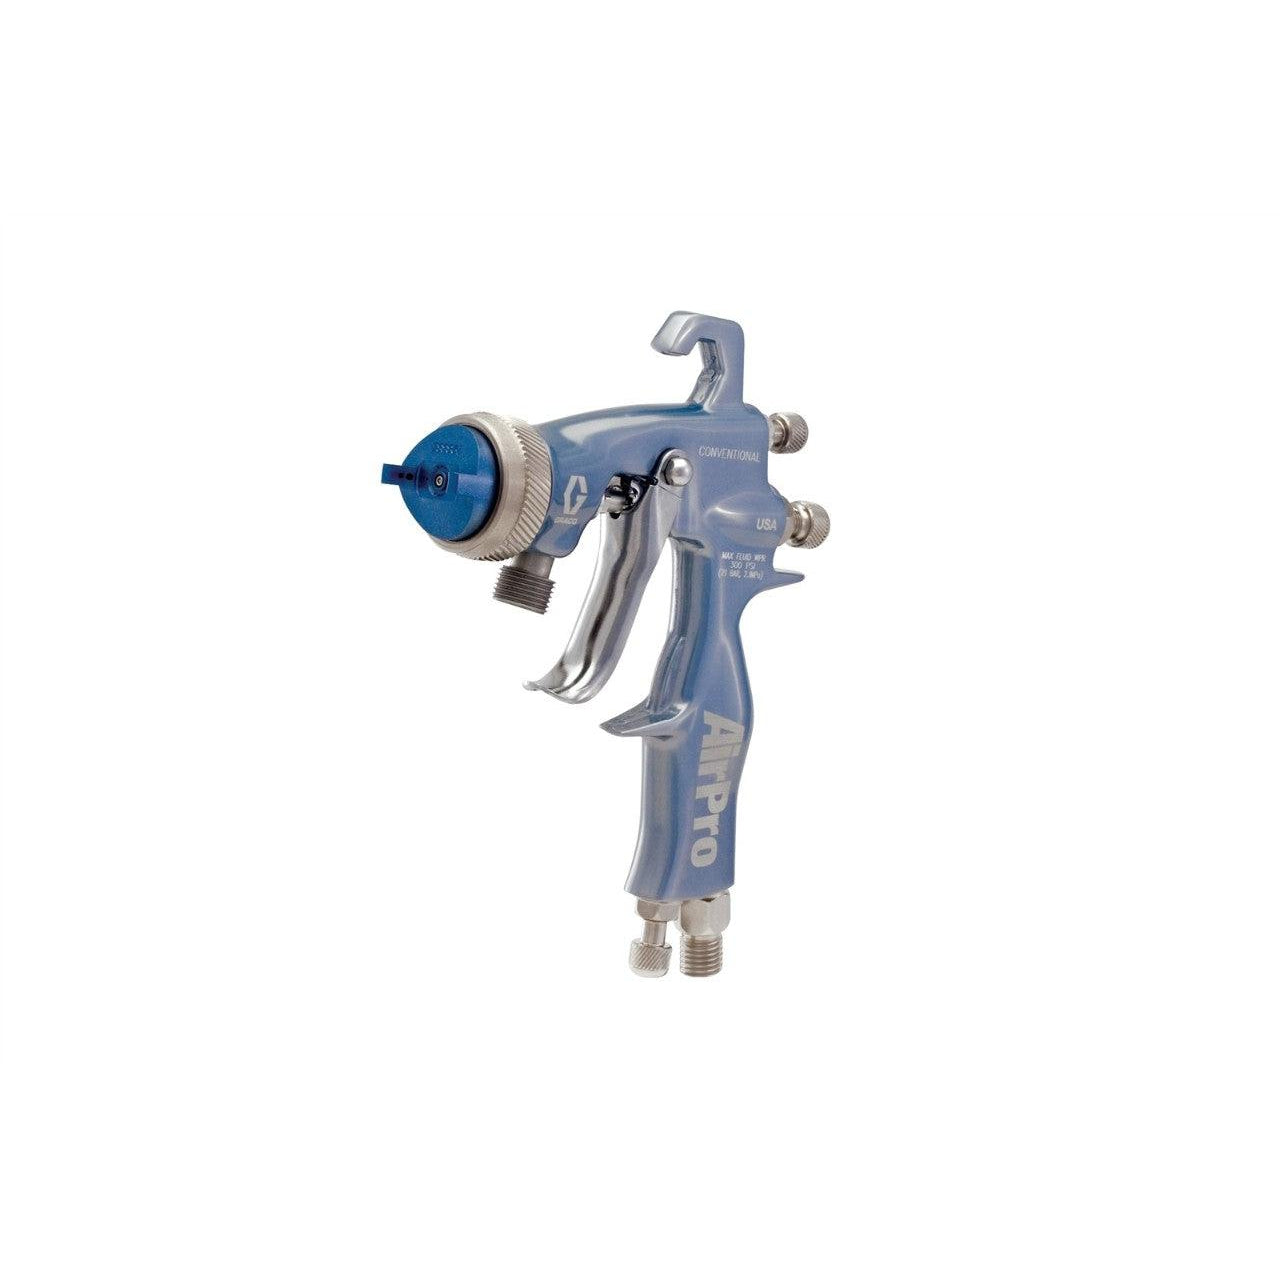 AirPro Air Spray Pressure Feed Gun, Conventional, 0.070 inch (1.8 mm) Nozzle, for Adhesive Applications